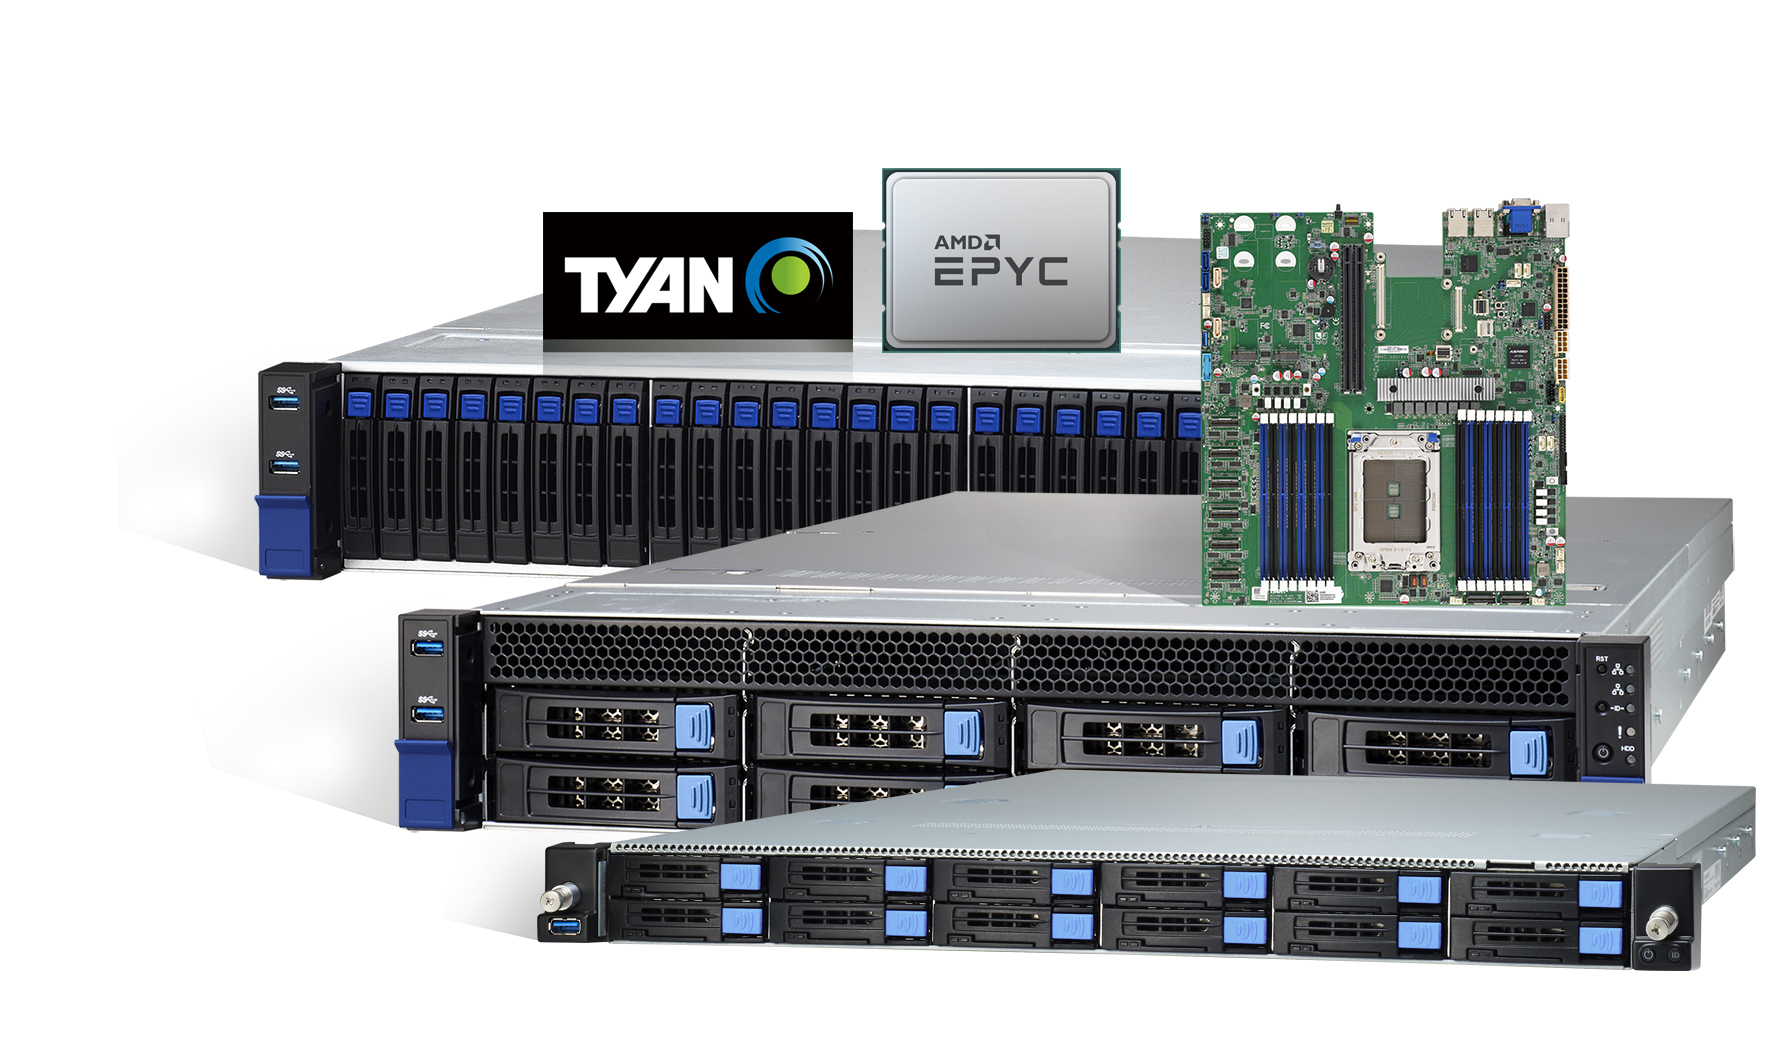 TYAN Launches AMD EPYC™ 7002 Series Processor-Based HPC and Storage Server Platforms at SC19 